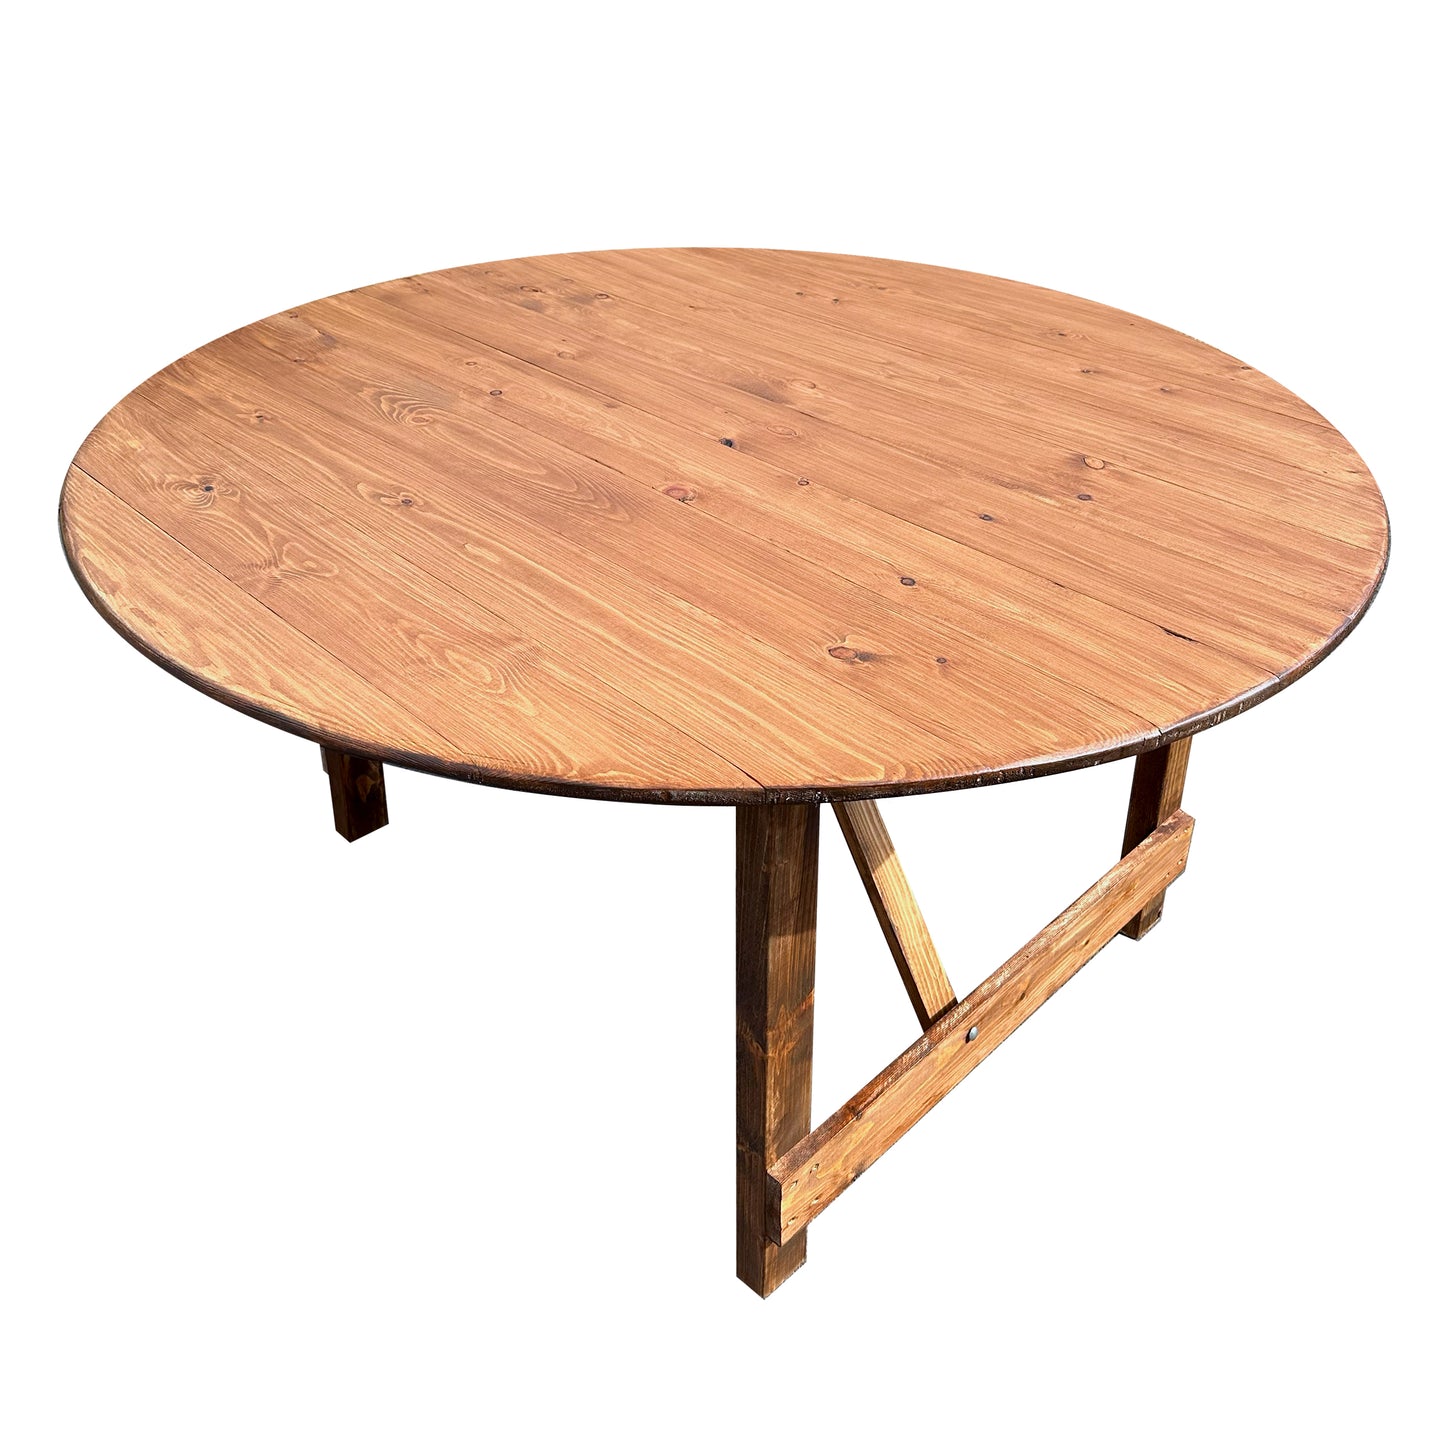 2. Outdoor Round Folding Rustic-style Trestle Table